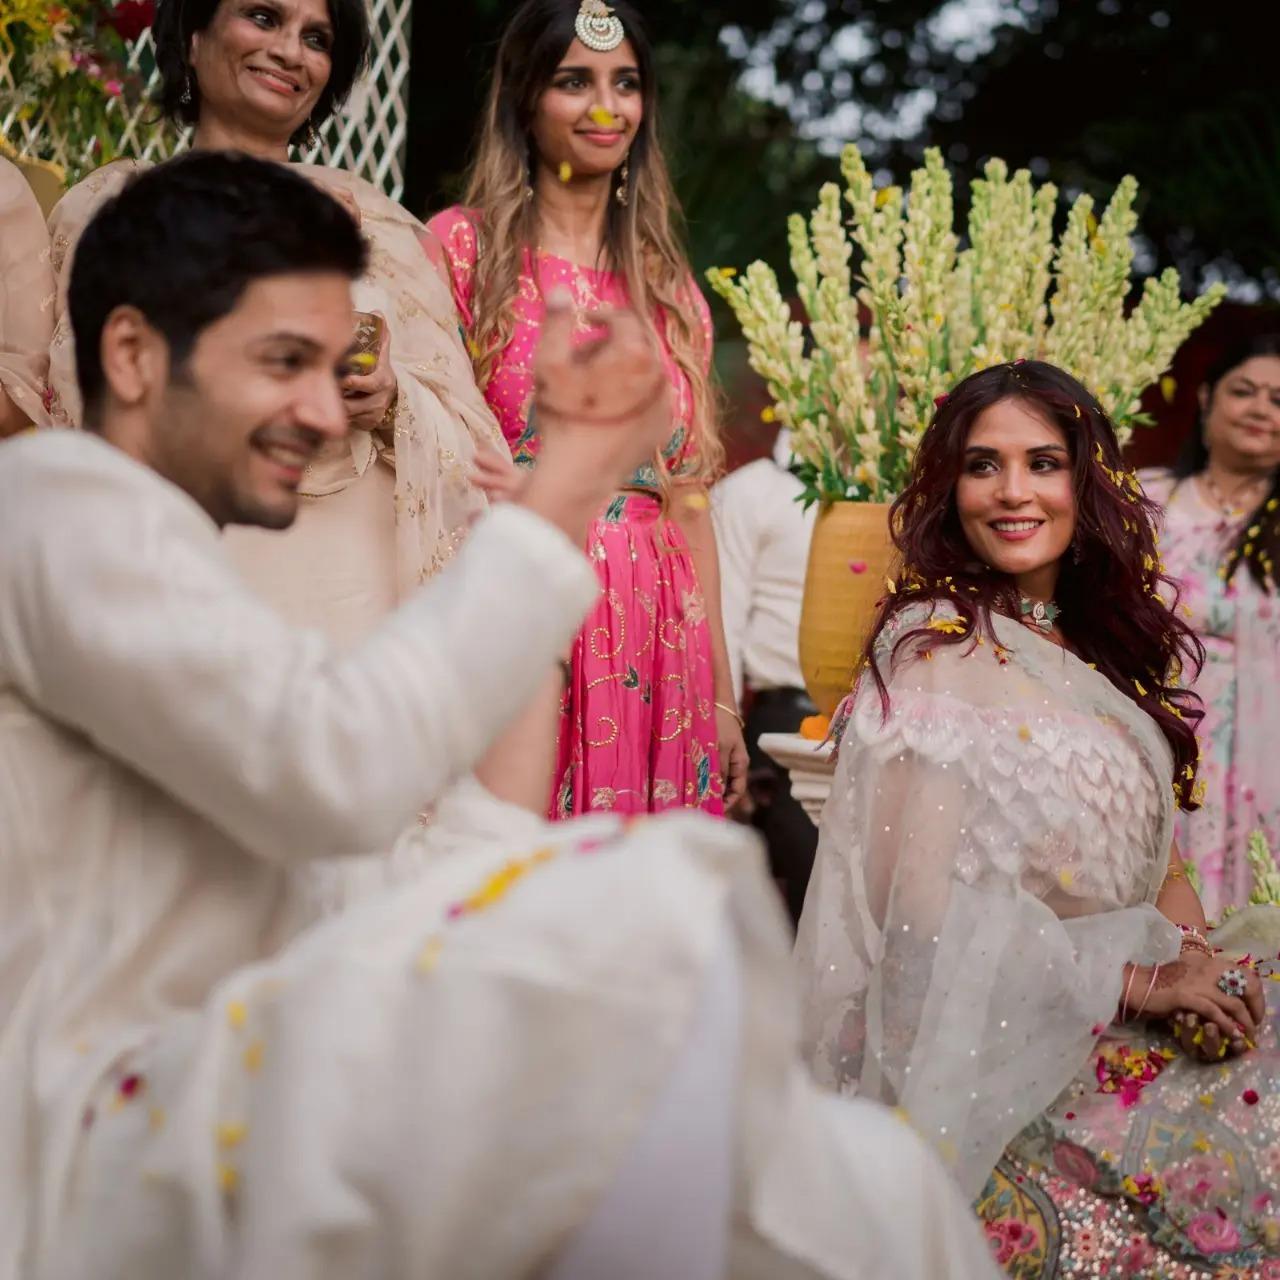 Richa Chadha and Ali Fazal opted for white outfits for their pre-wedding festivities